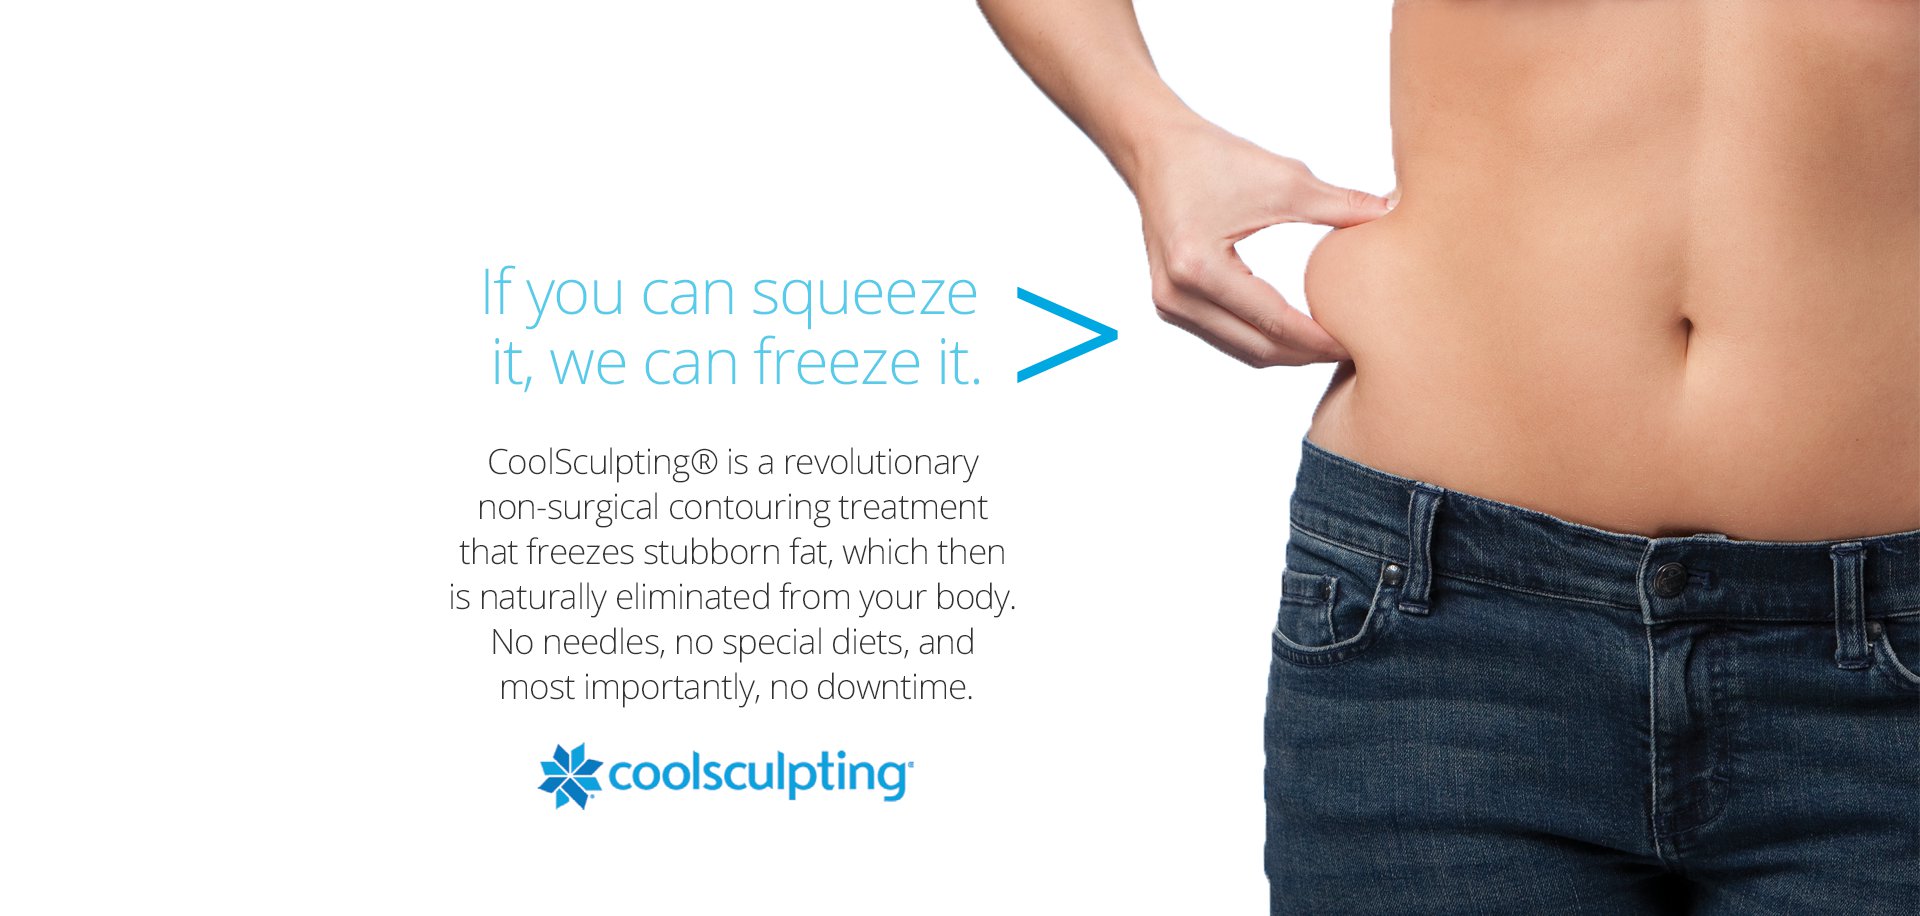 CoolSculpting image of a woman squeezing her side